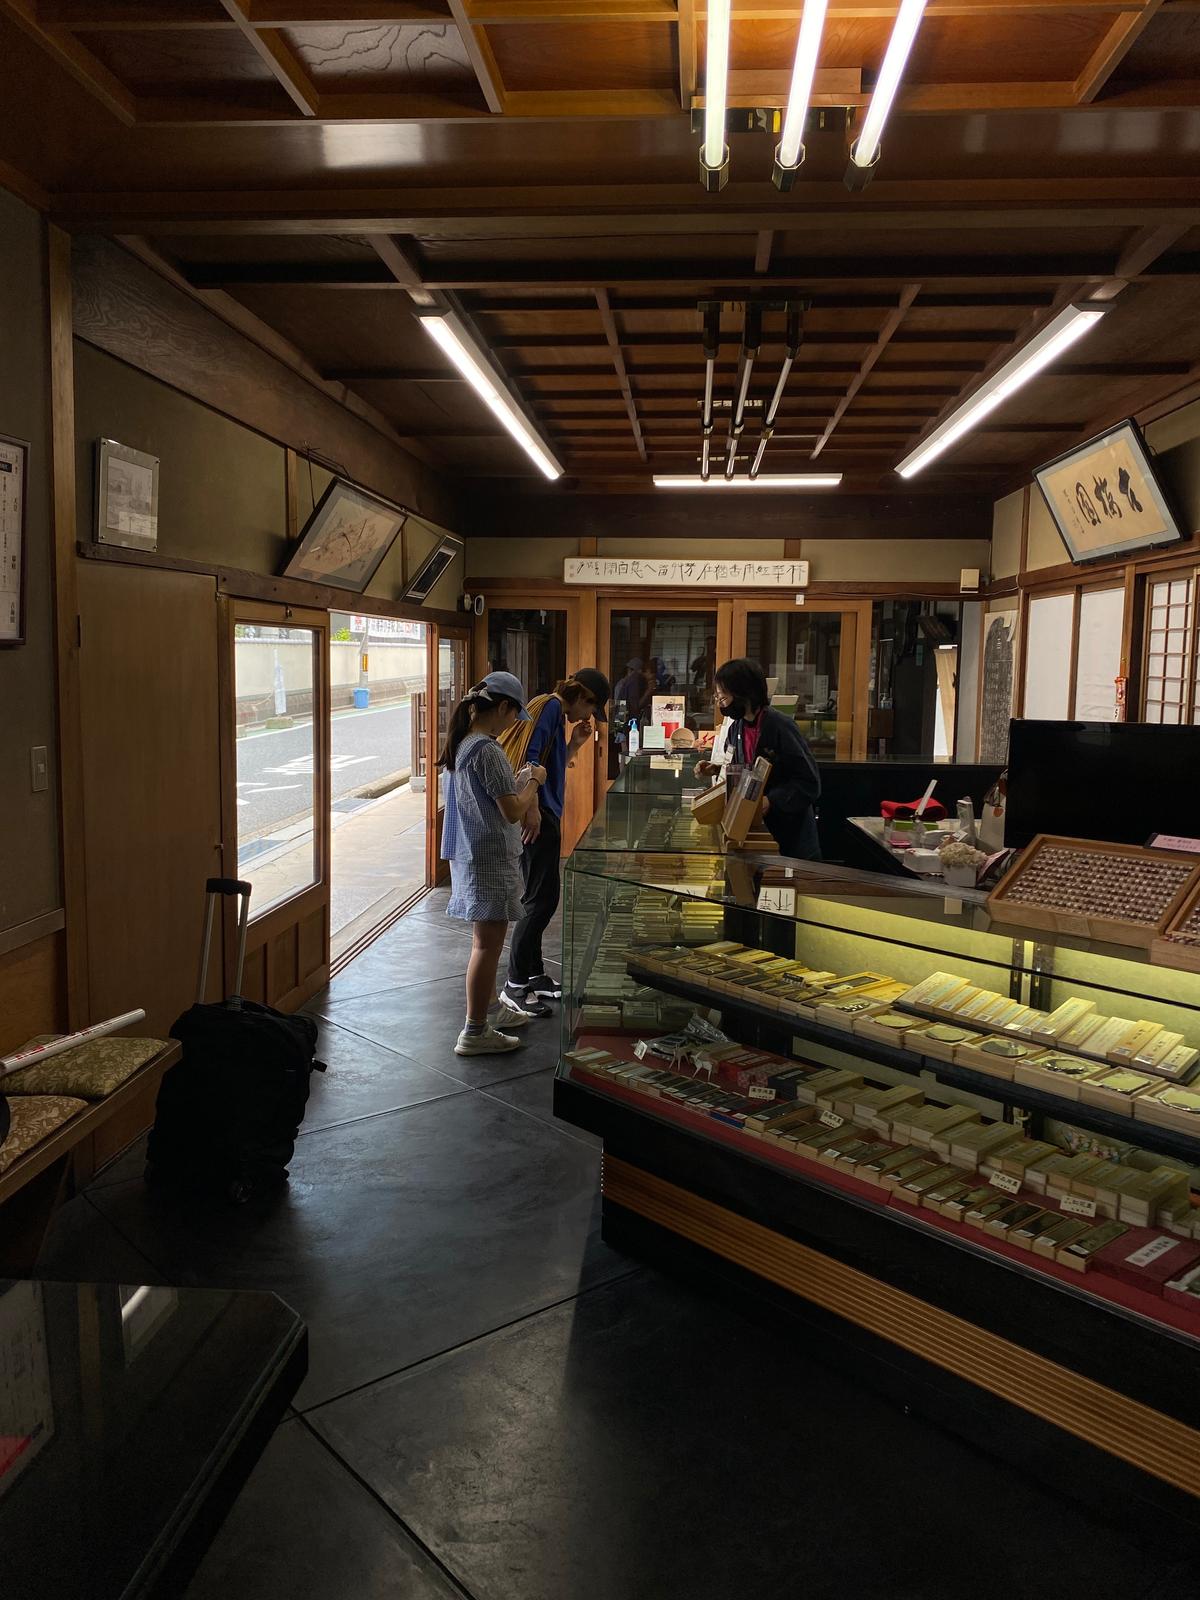 Customers at the Kobaien shop. Some of its bestselling 5-star ink sticks are Koukaboku, Shitsuboku, Baikaboku, and Shouenboku, which have long been "highly regarded by many." (Courtesy of <a href="https://worlds-oldest-inksticks.jp/">ICHI Inc, Japan</a>)